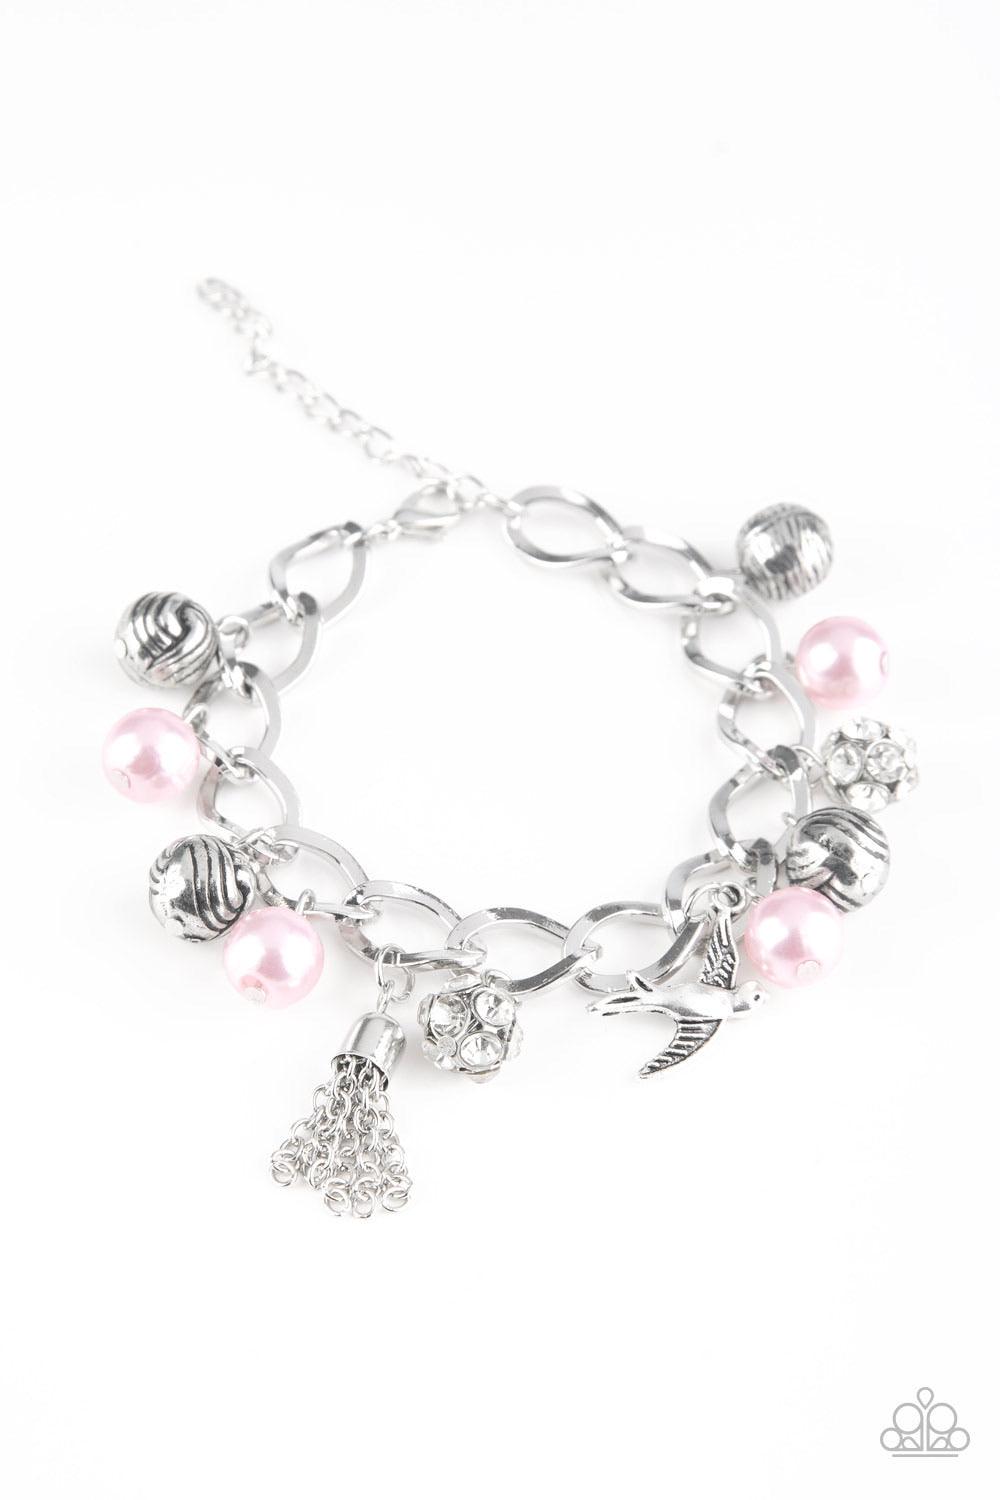 Paparazzi Accessories Lady Love Dove - Pink Pink pearls, ornate silver beads, and white rhinestone encrusted accents swing from a dramatic silver chain. A shimmery silver bird charm and silver tassel are added to the display, creating a whimsical fringe a